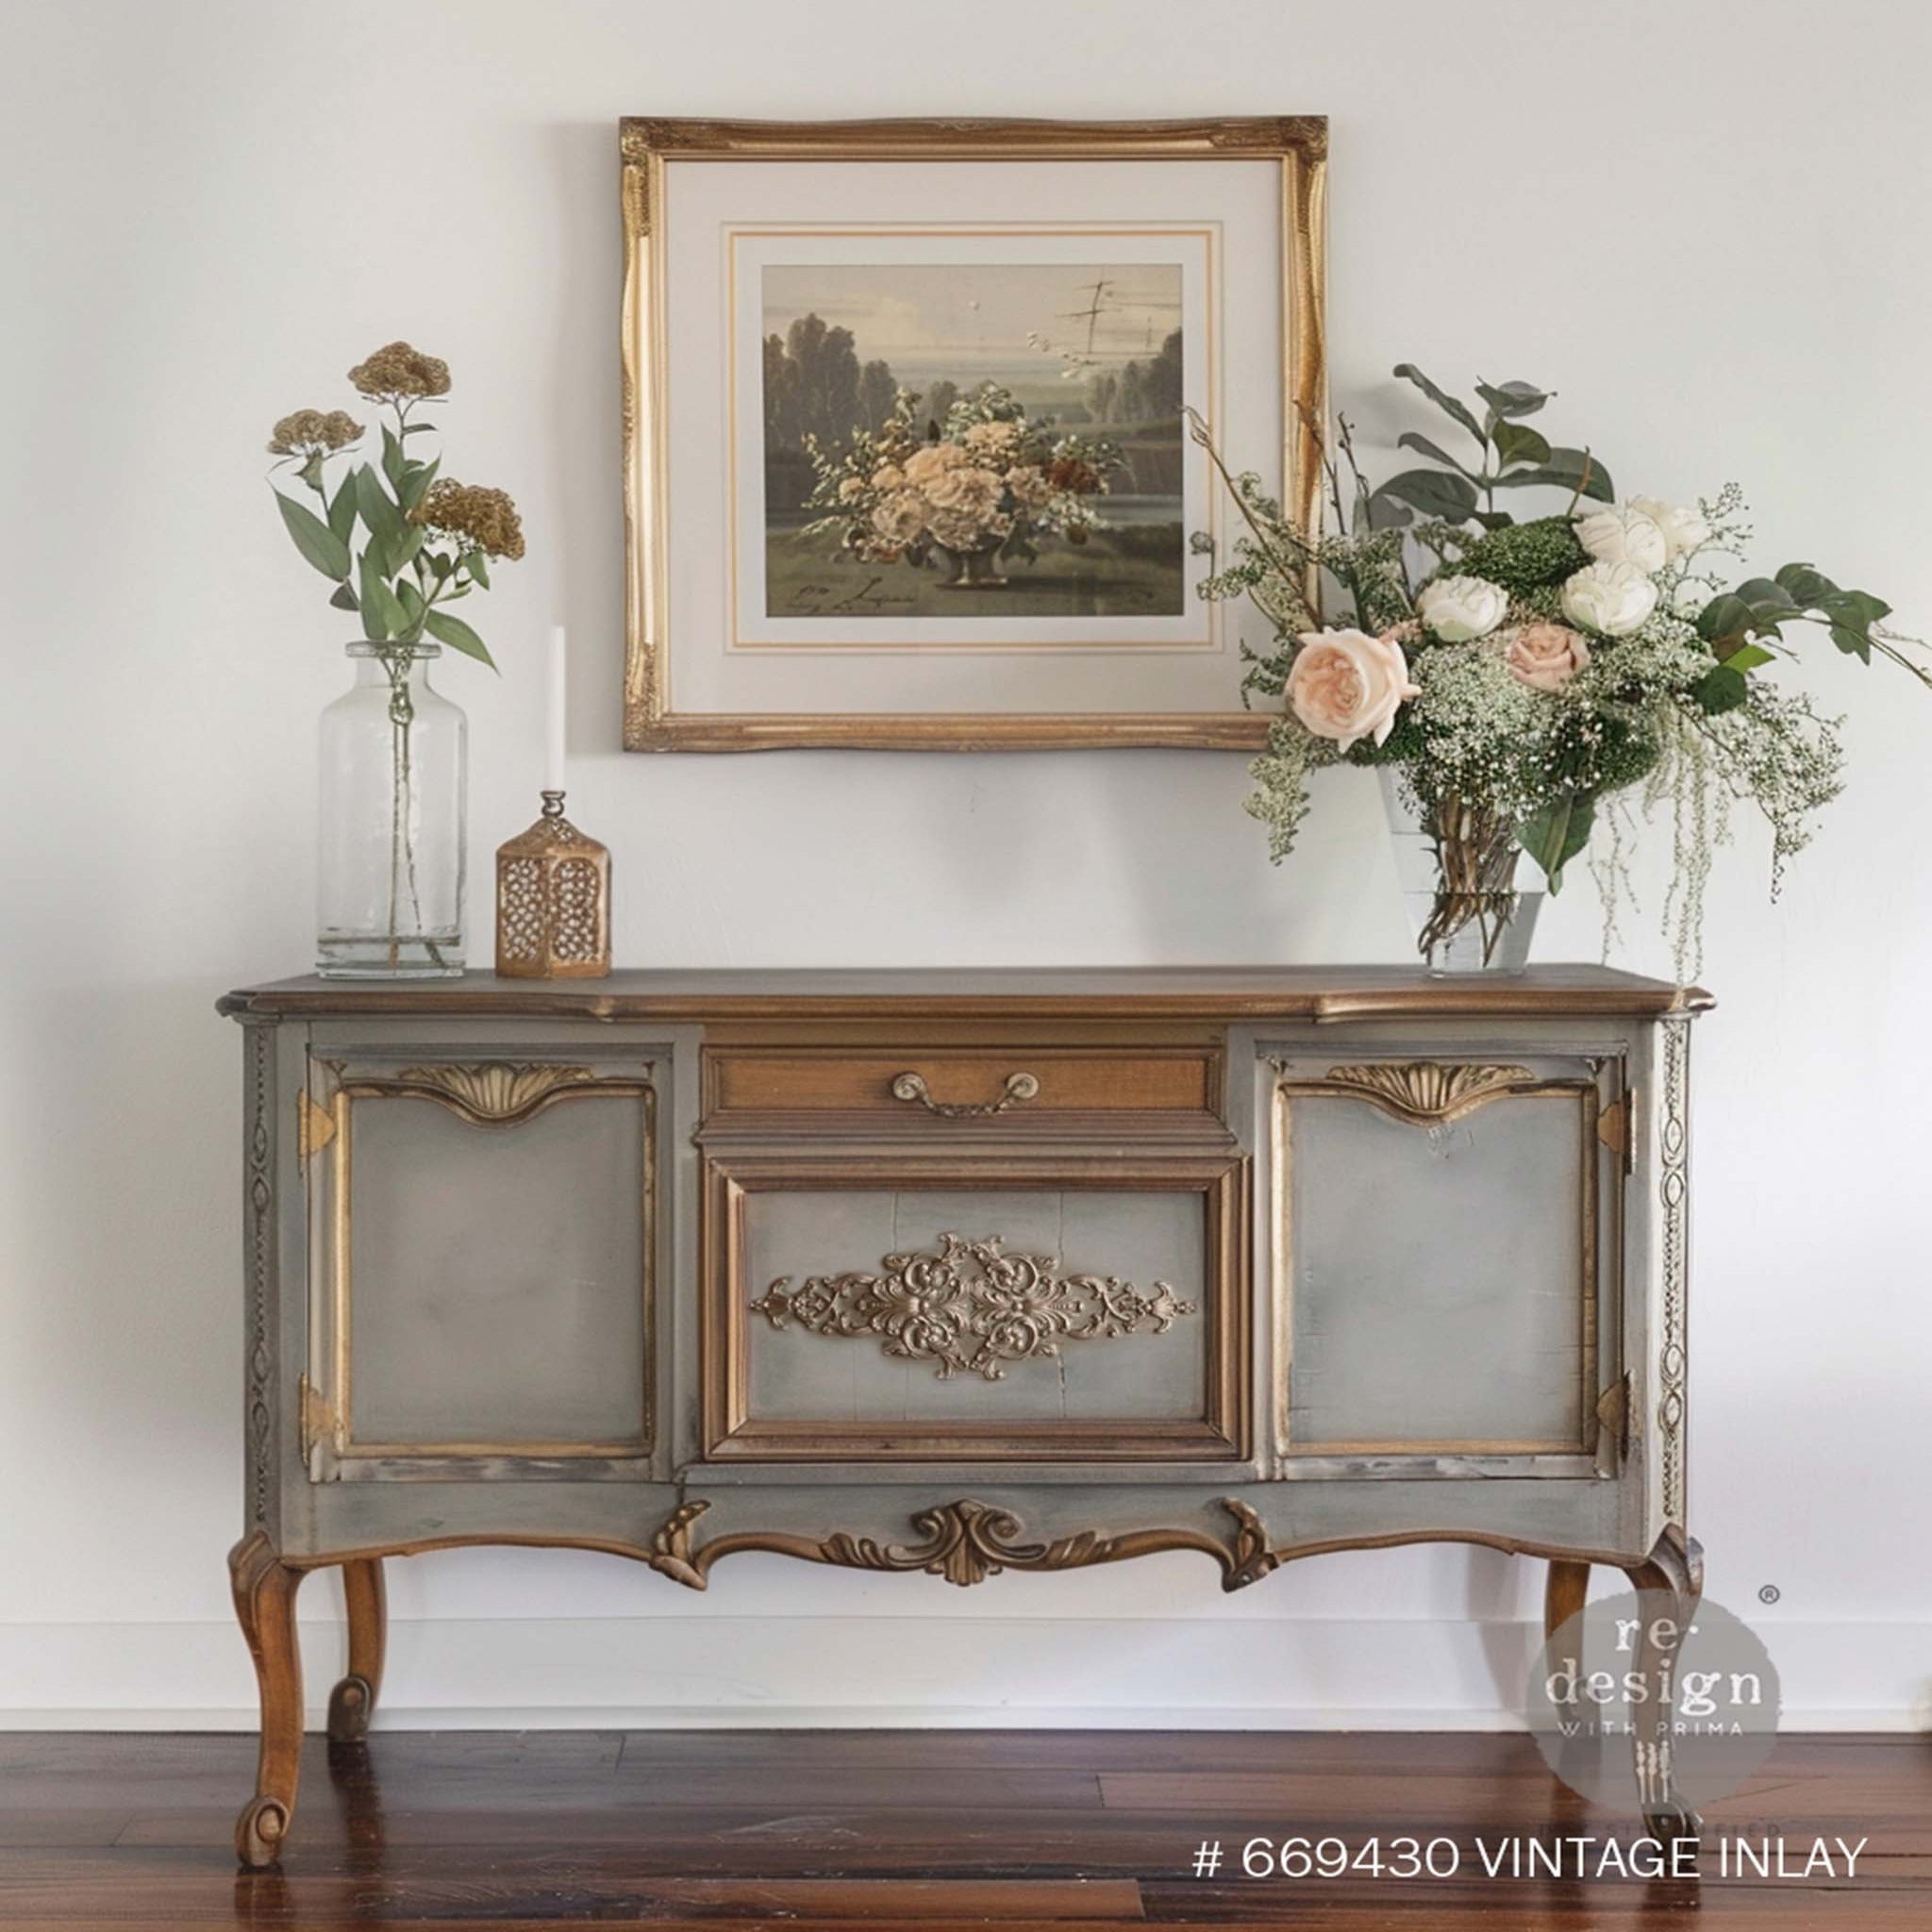 A vintage console table is painted gray with bronze accents and features ReDesign with Prima's Vintage Inlay Decor Poly on a center panel.